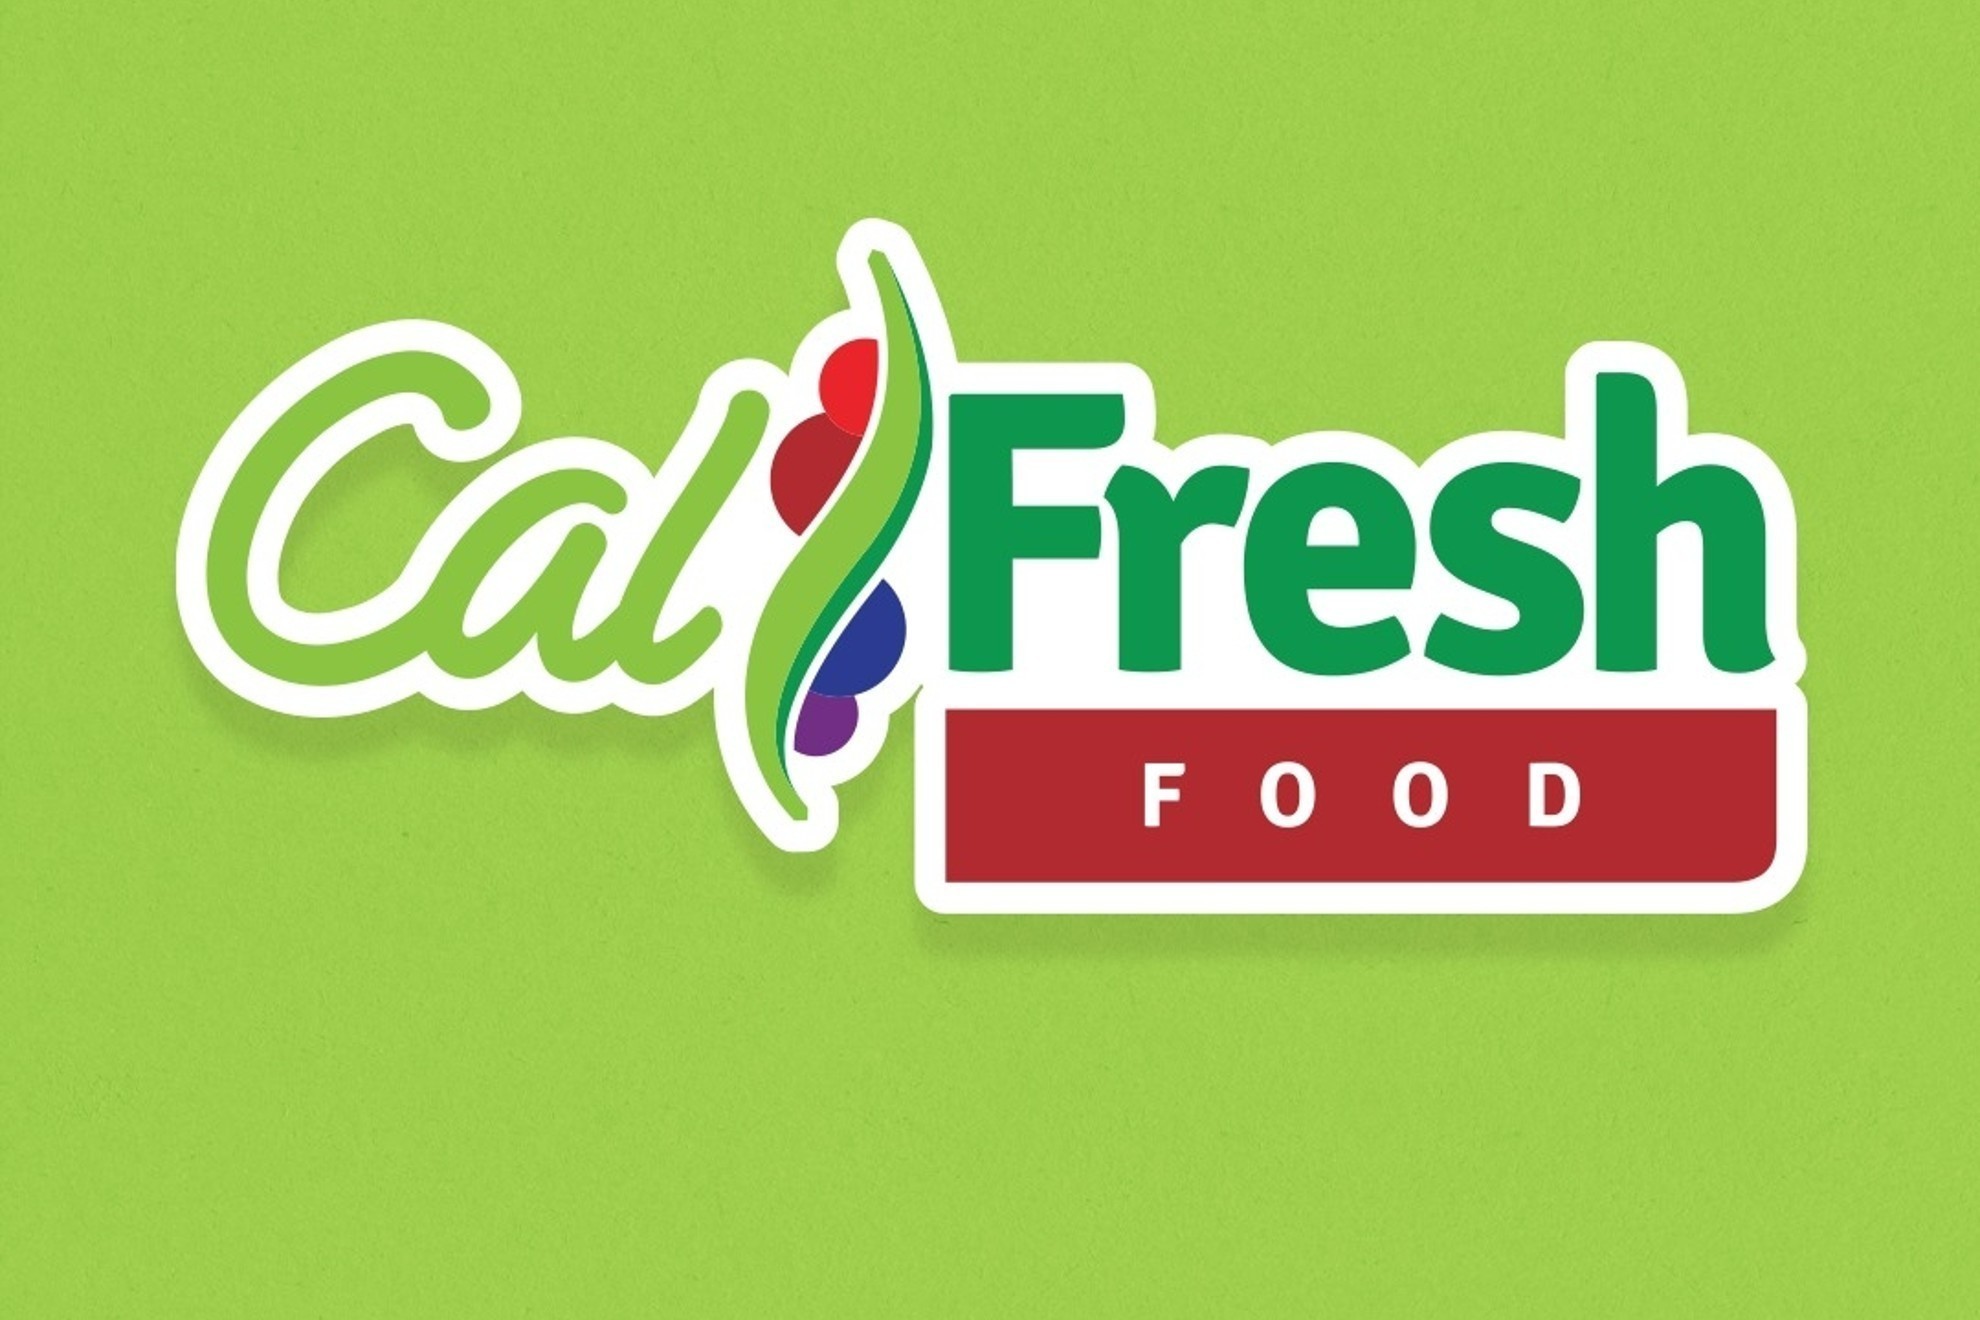 My Benefits CalFresh: Are you getting your November payment this week even if its on a weekend?